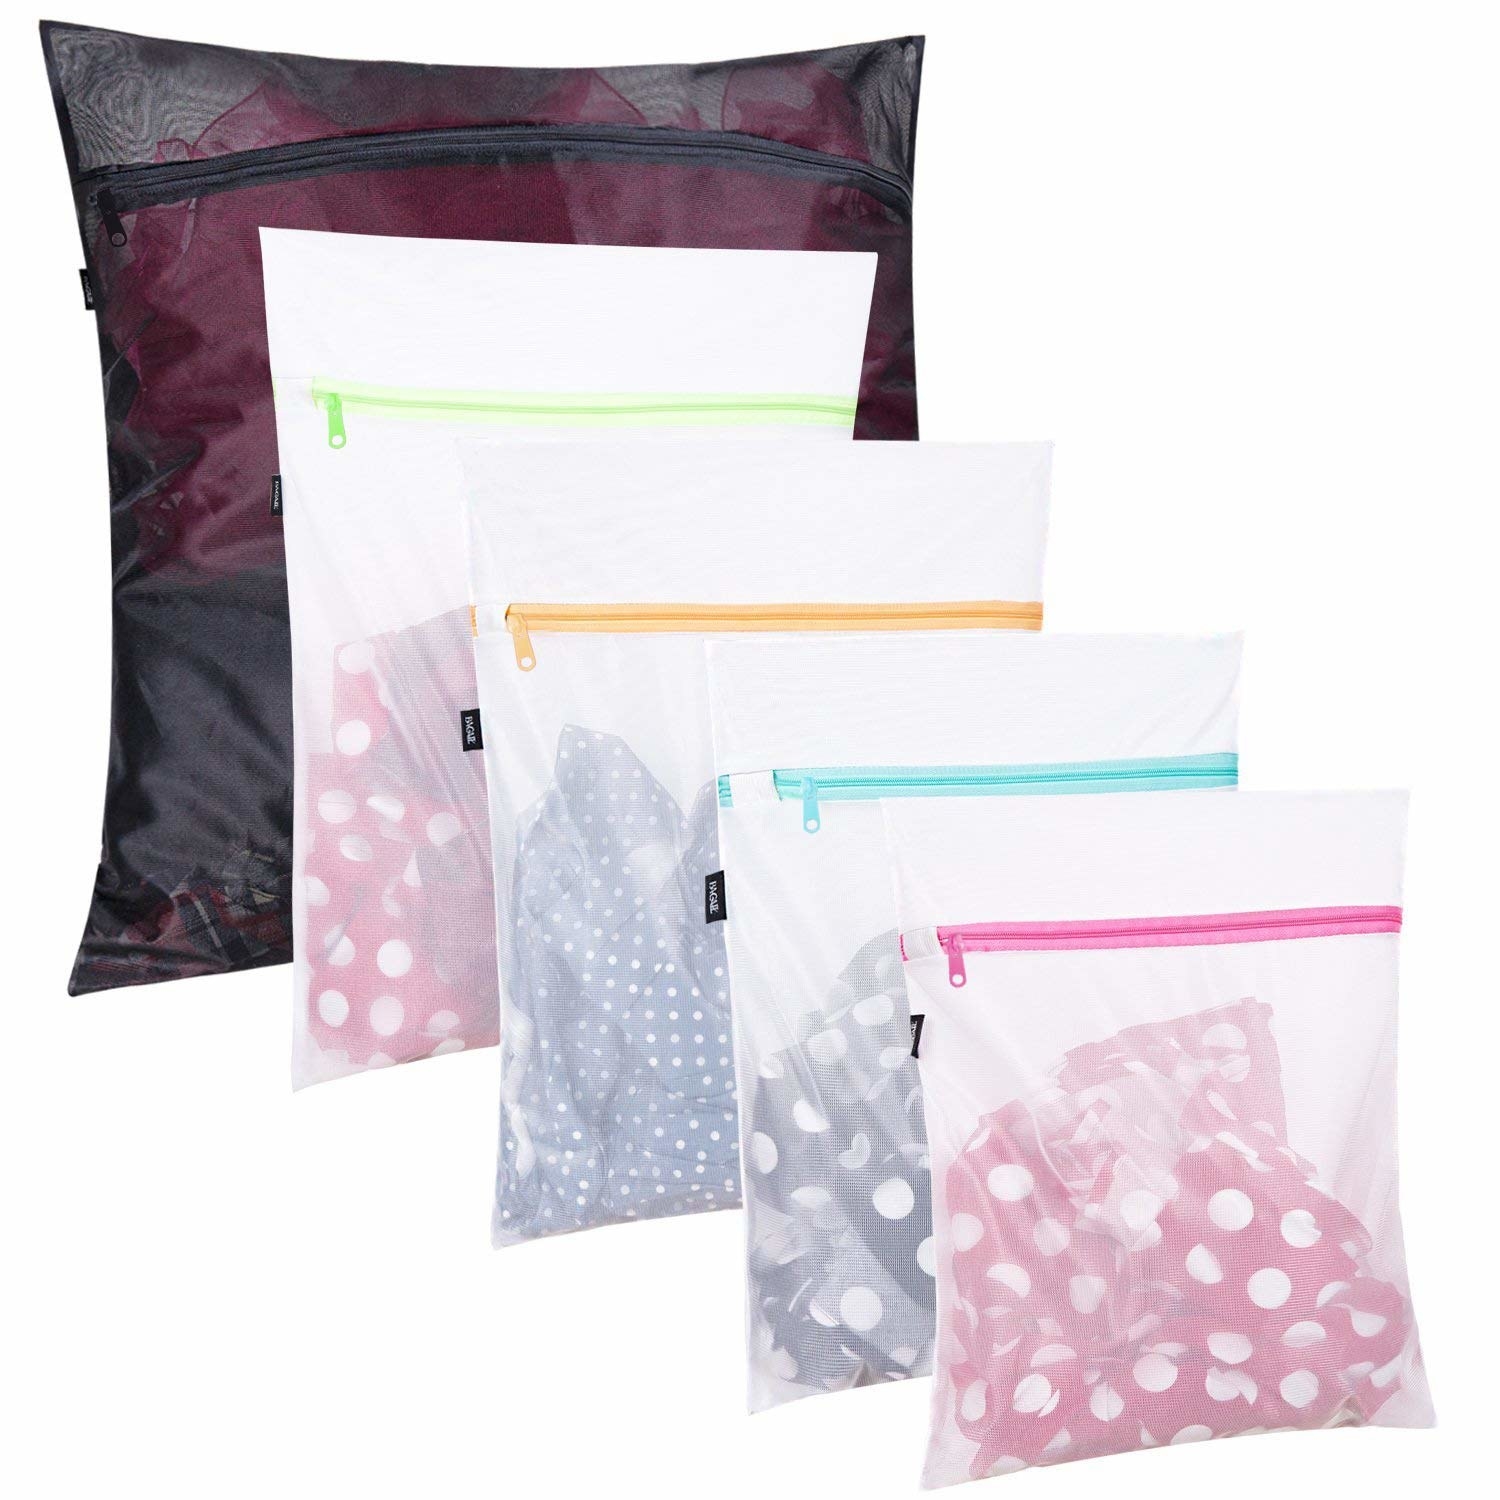 The laundry bags in a variety of different sizes holding a variety of items